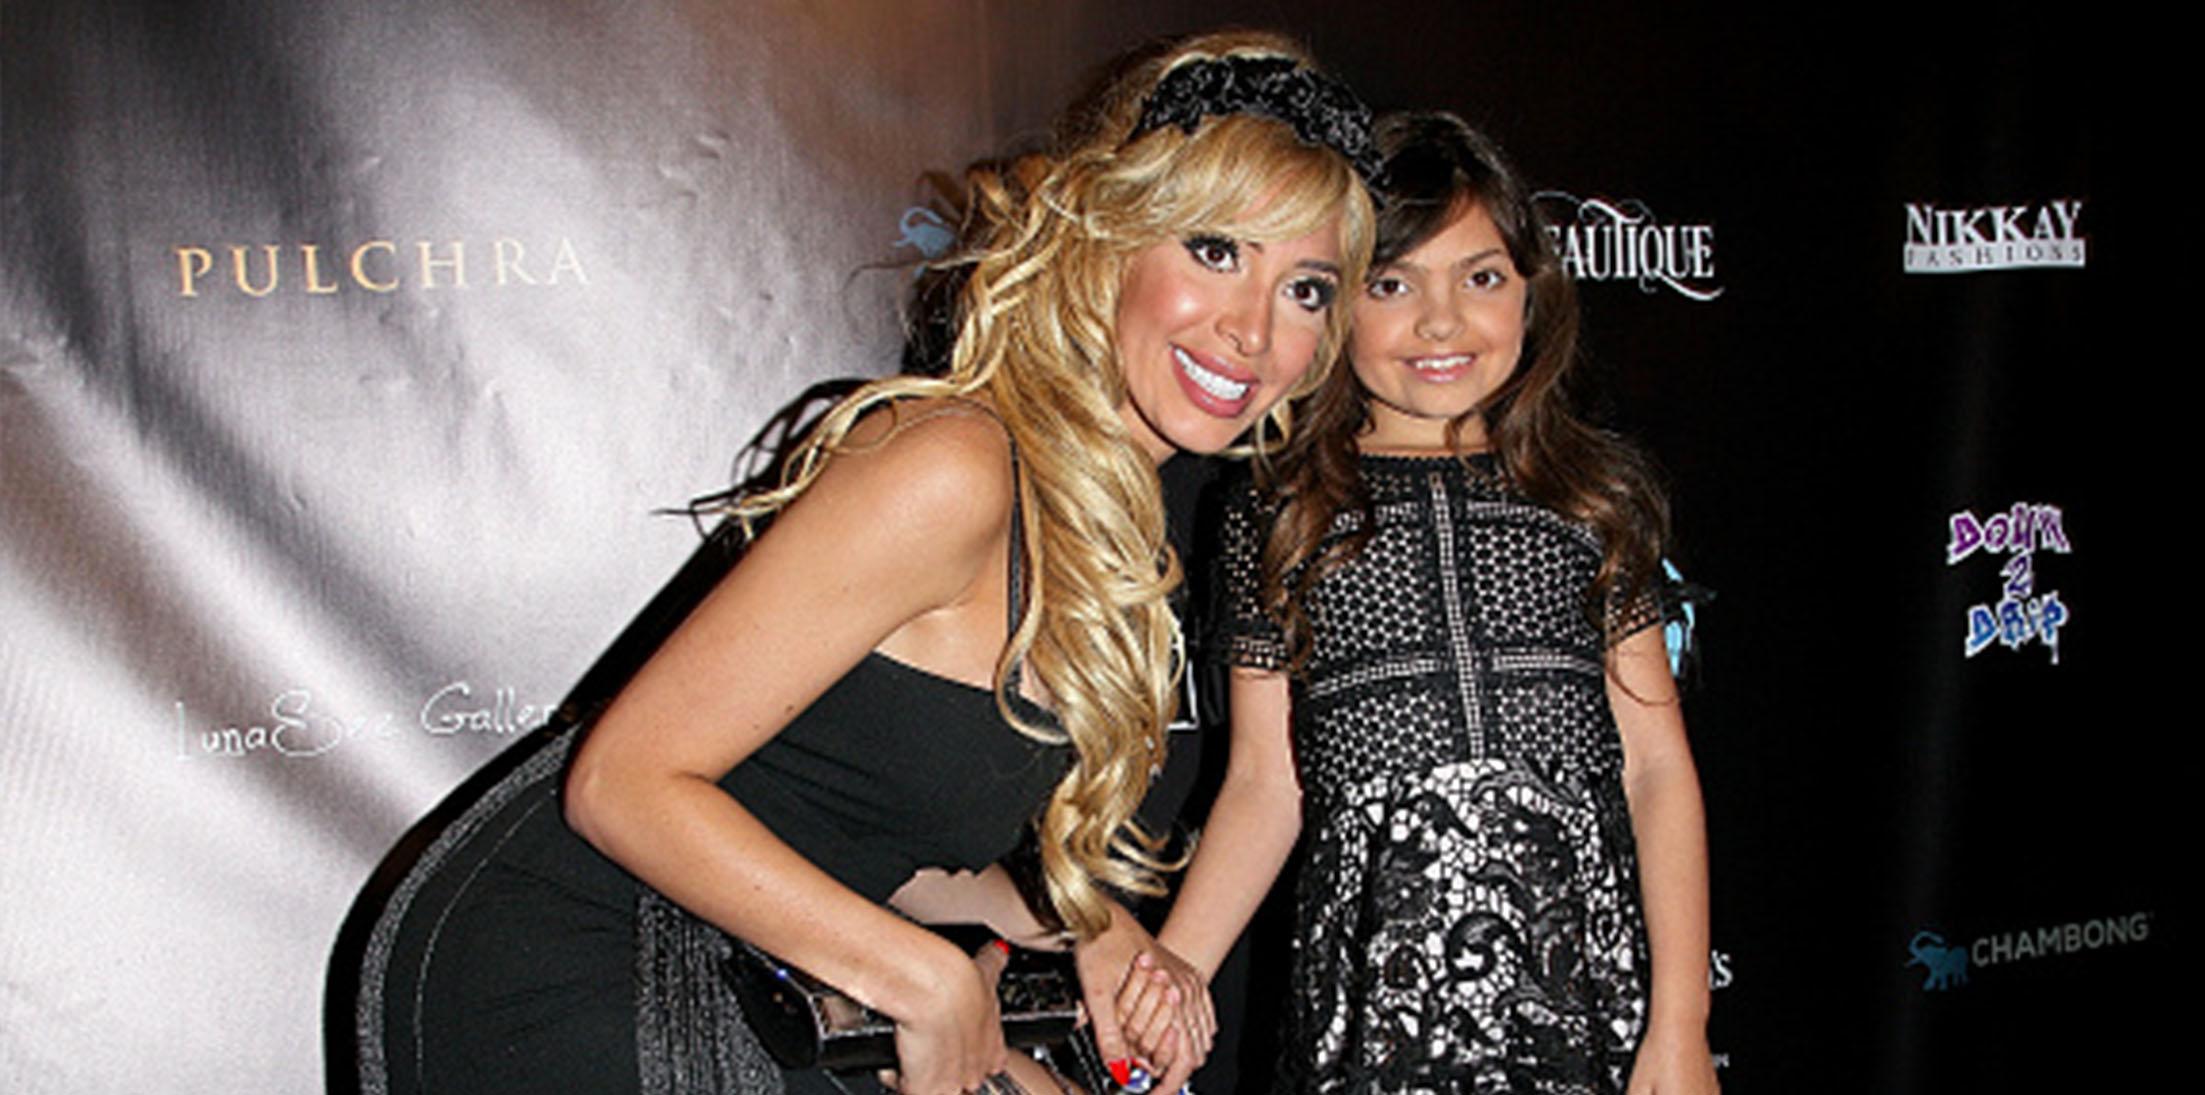 Bad Parenting Farrah Abraham Brings Daughter Sophia To Her Out Of